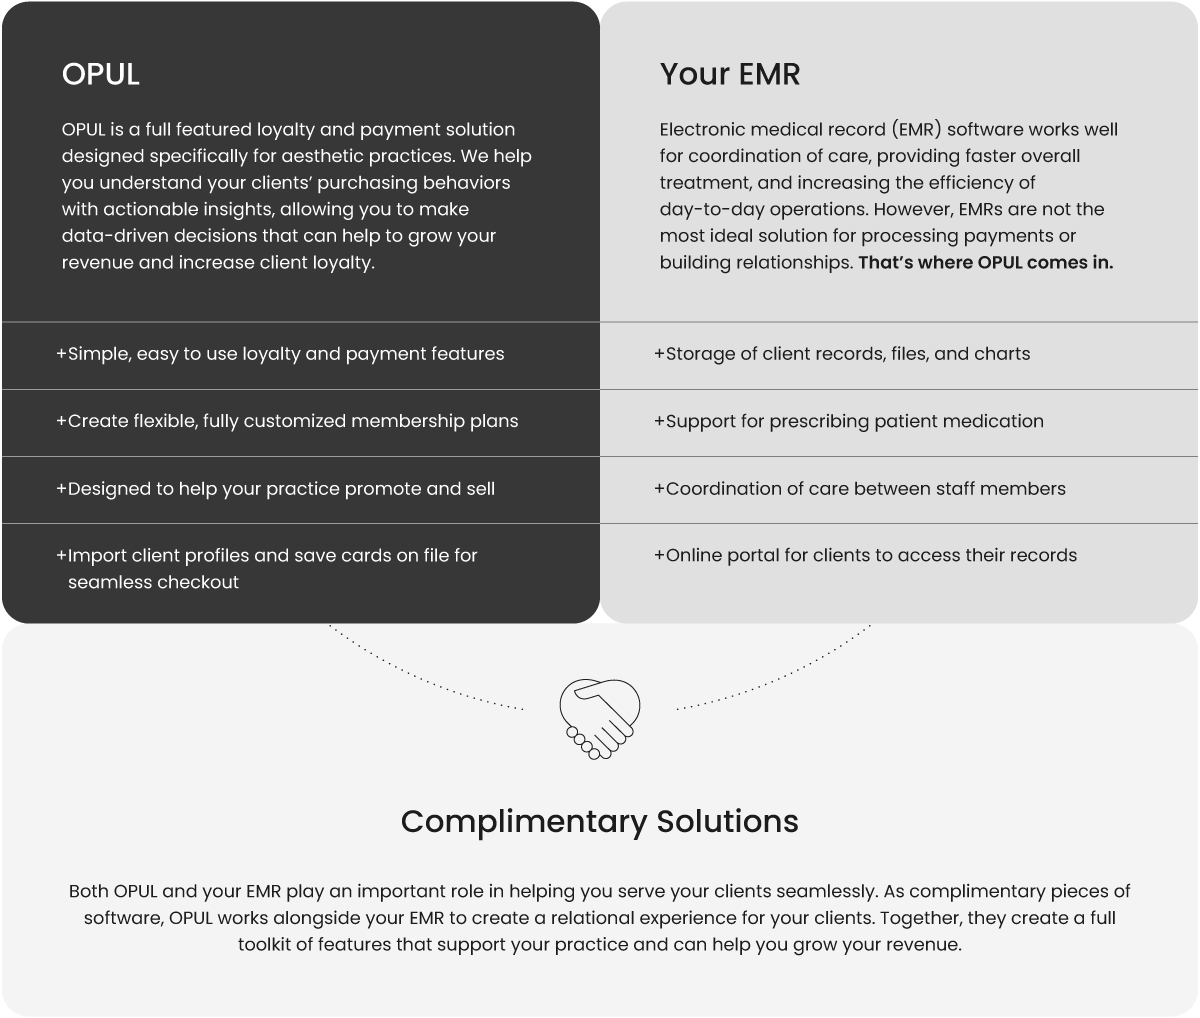 OP00334_Sales_Tool_OPUL_with_Your_EMR_DB_031523_v04_DIAGRAM.png